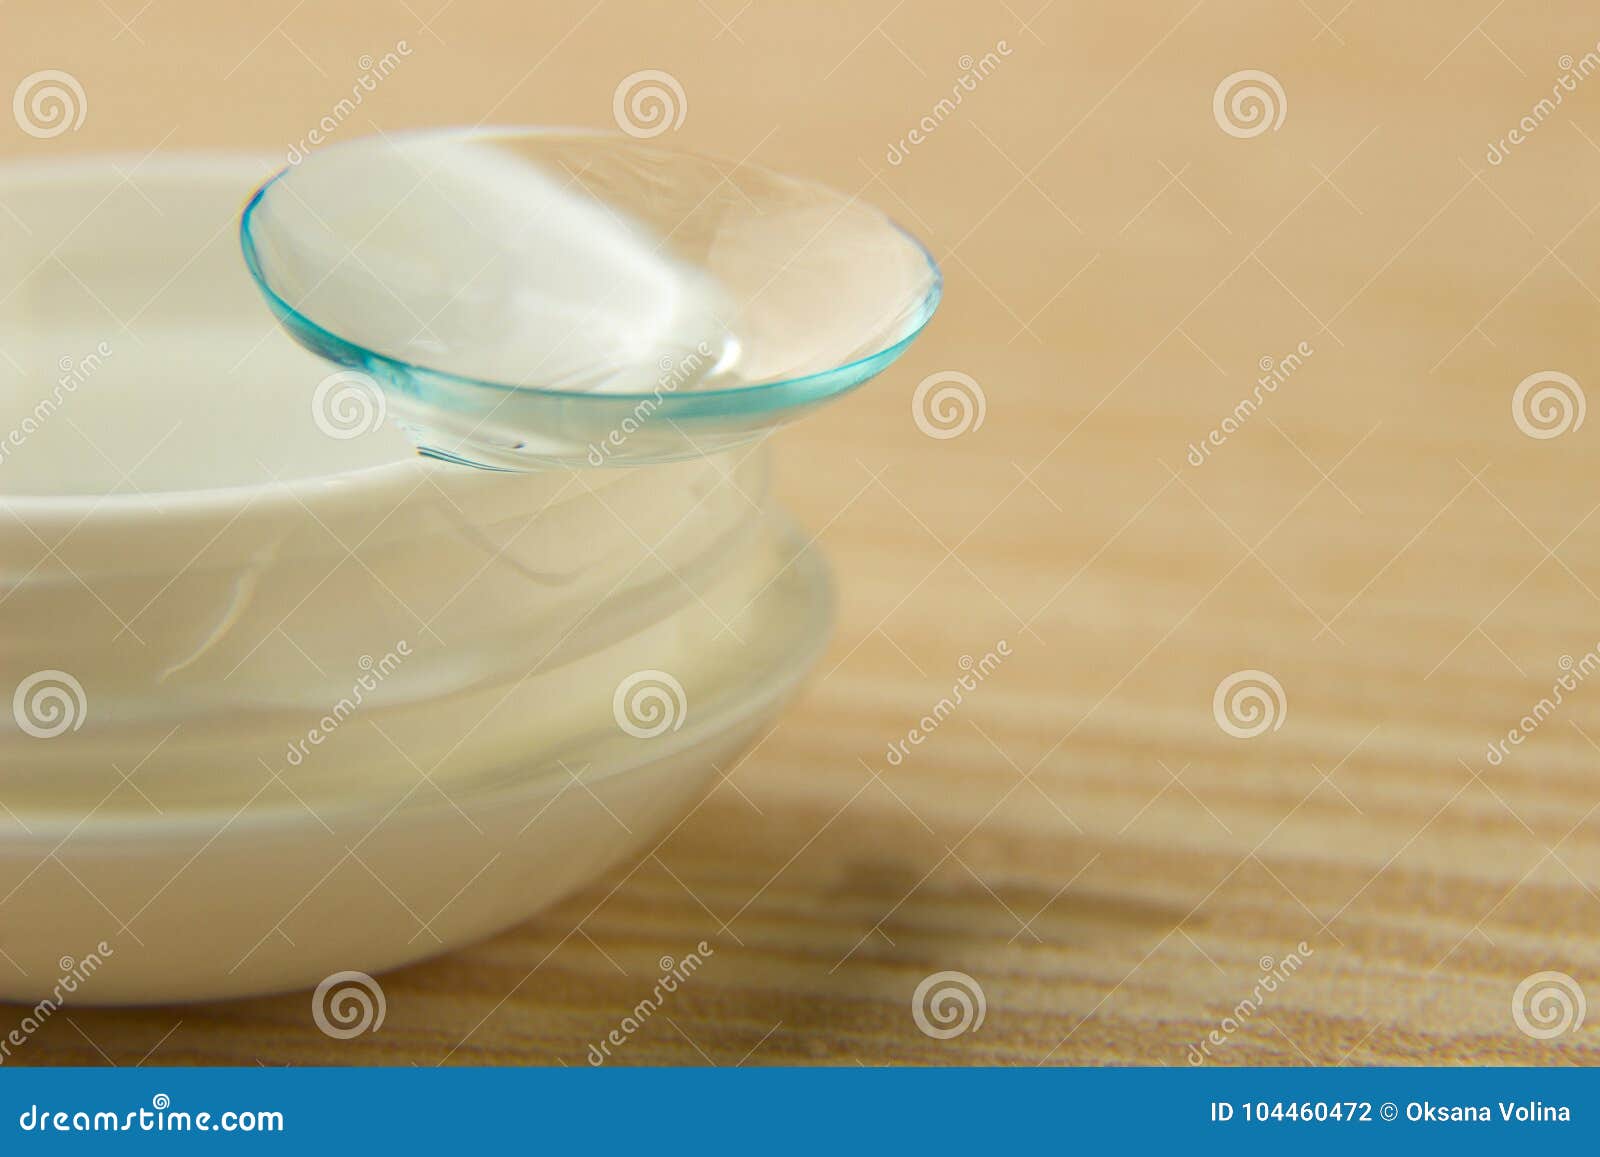 contact lenses for the eyes and a white container with a solution on a wooden table